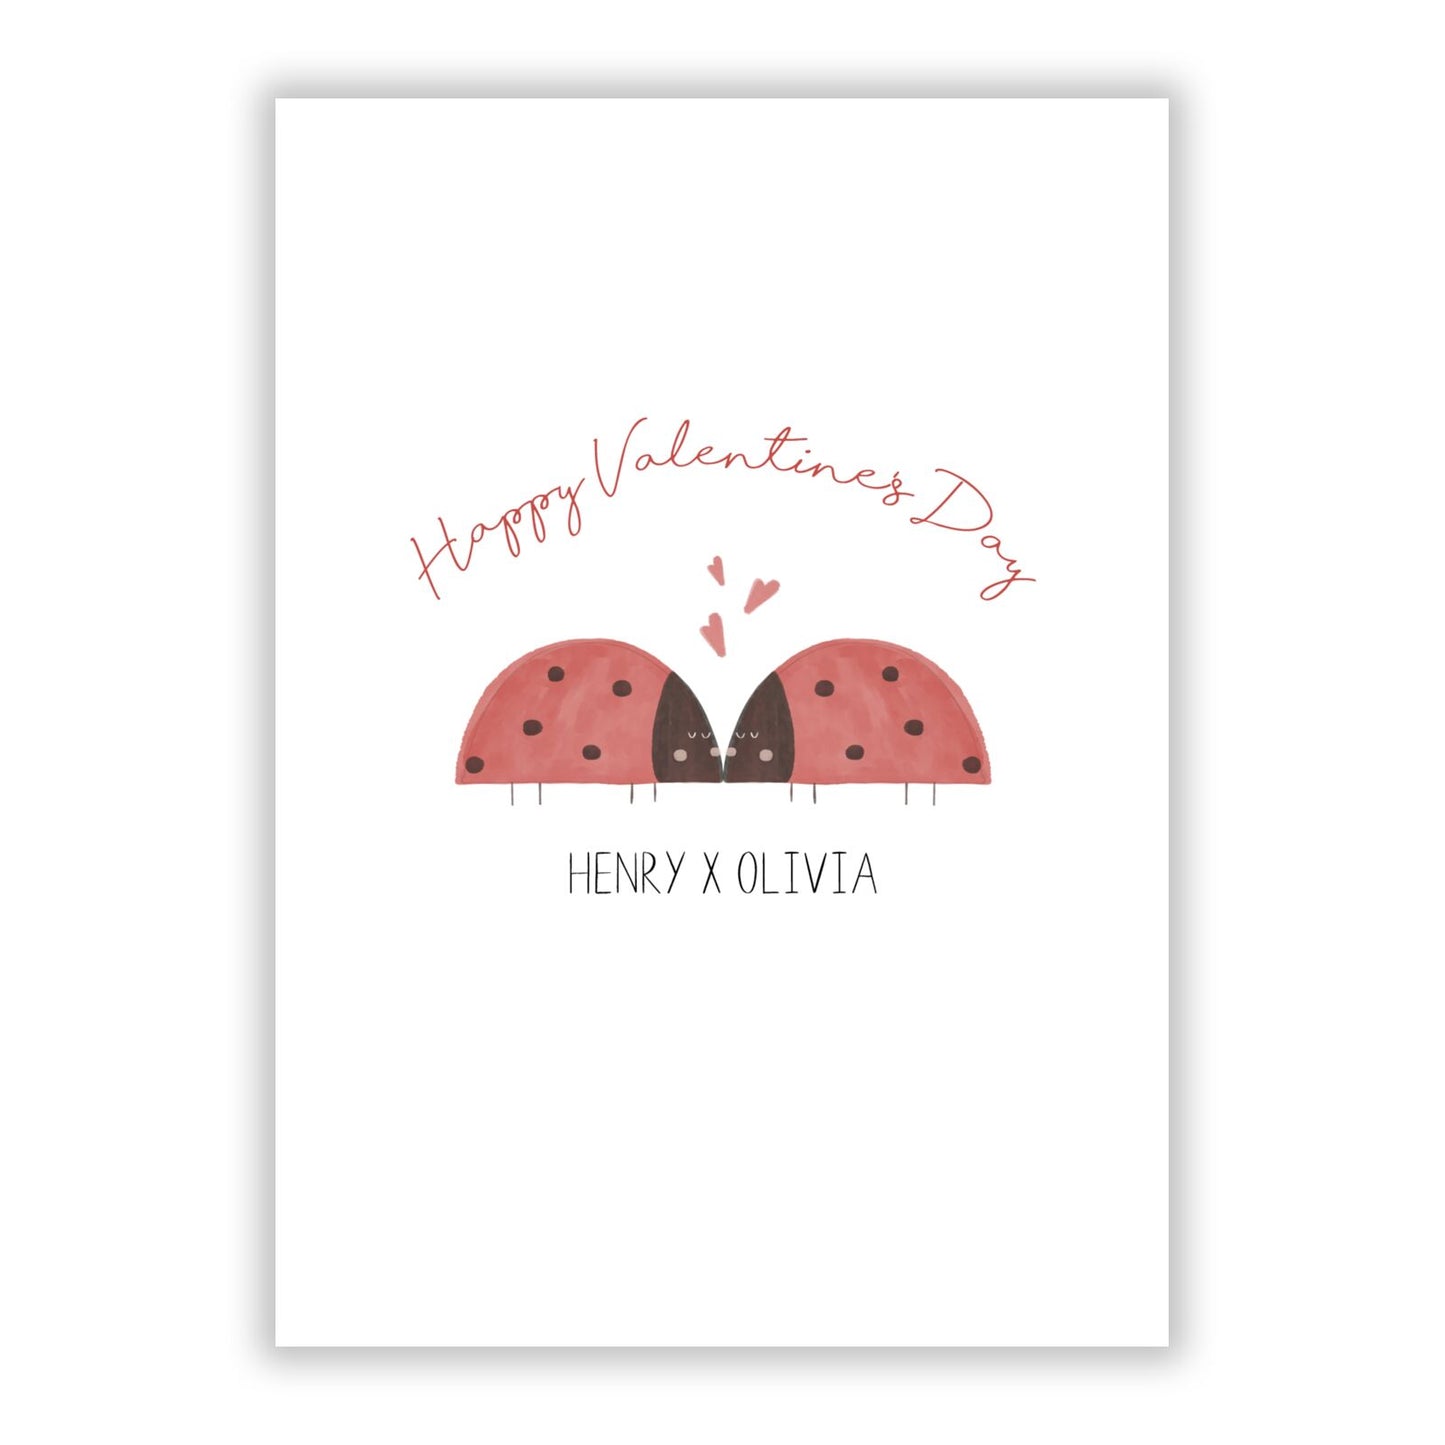 Two Ladybirds A5 Flat Greetings Card